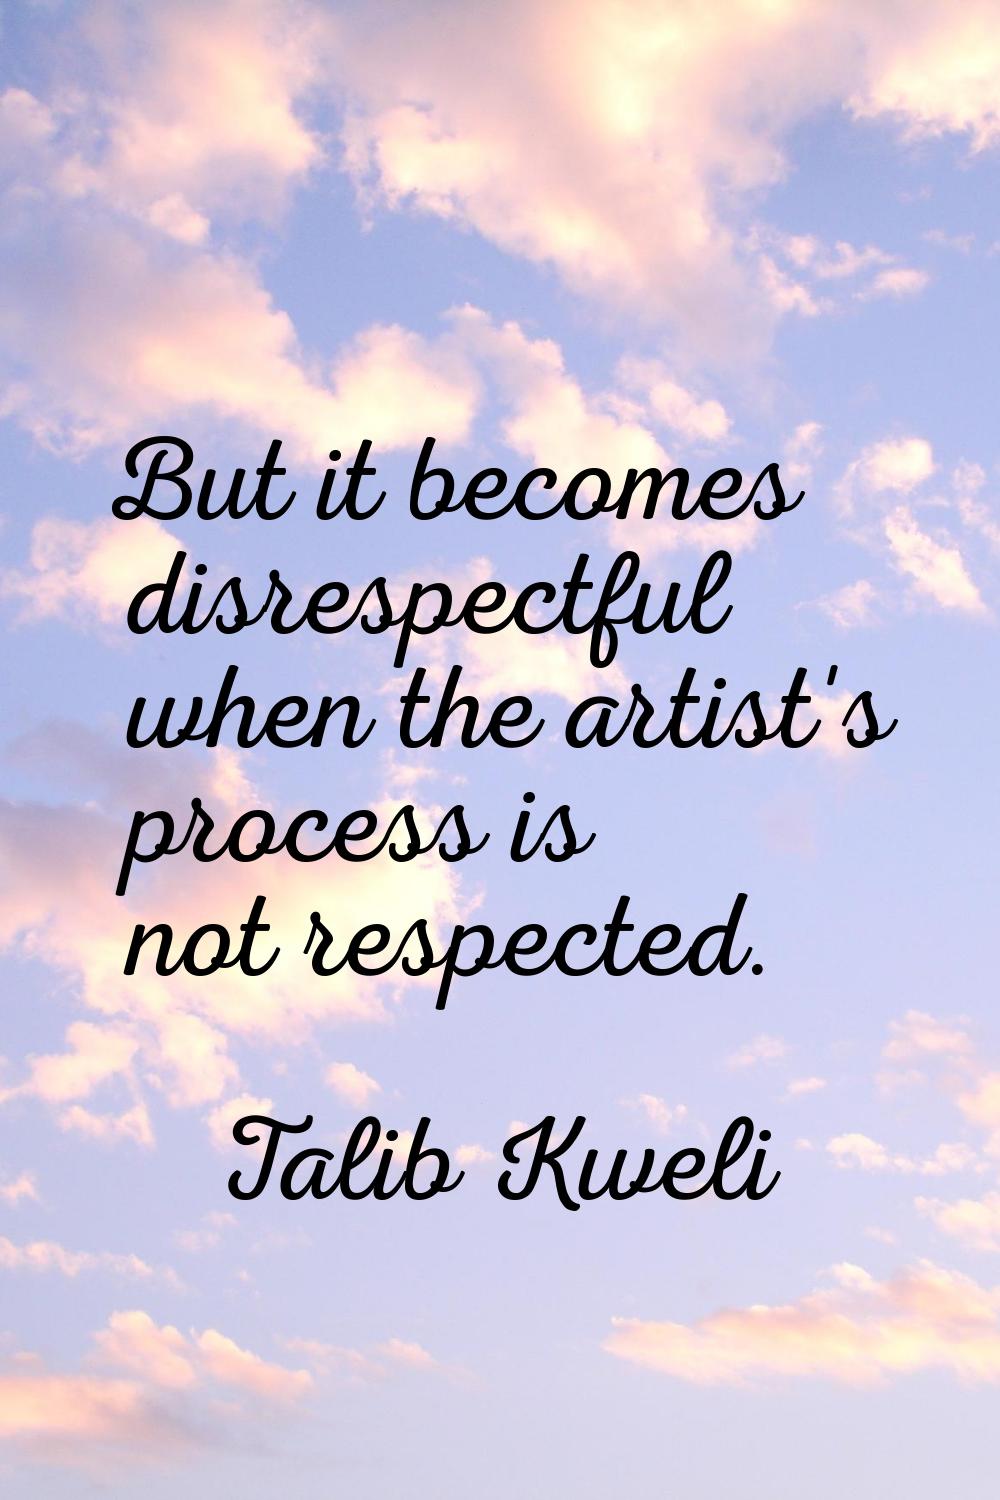 But it becomes disrespectful when the artist's process is not respected.